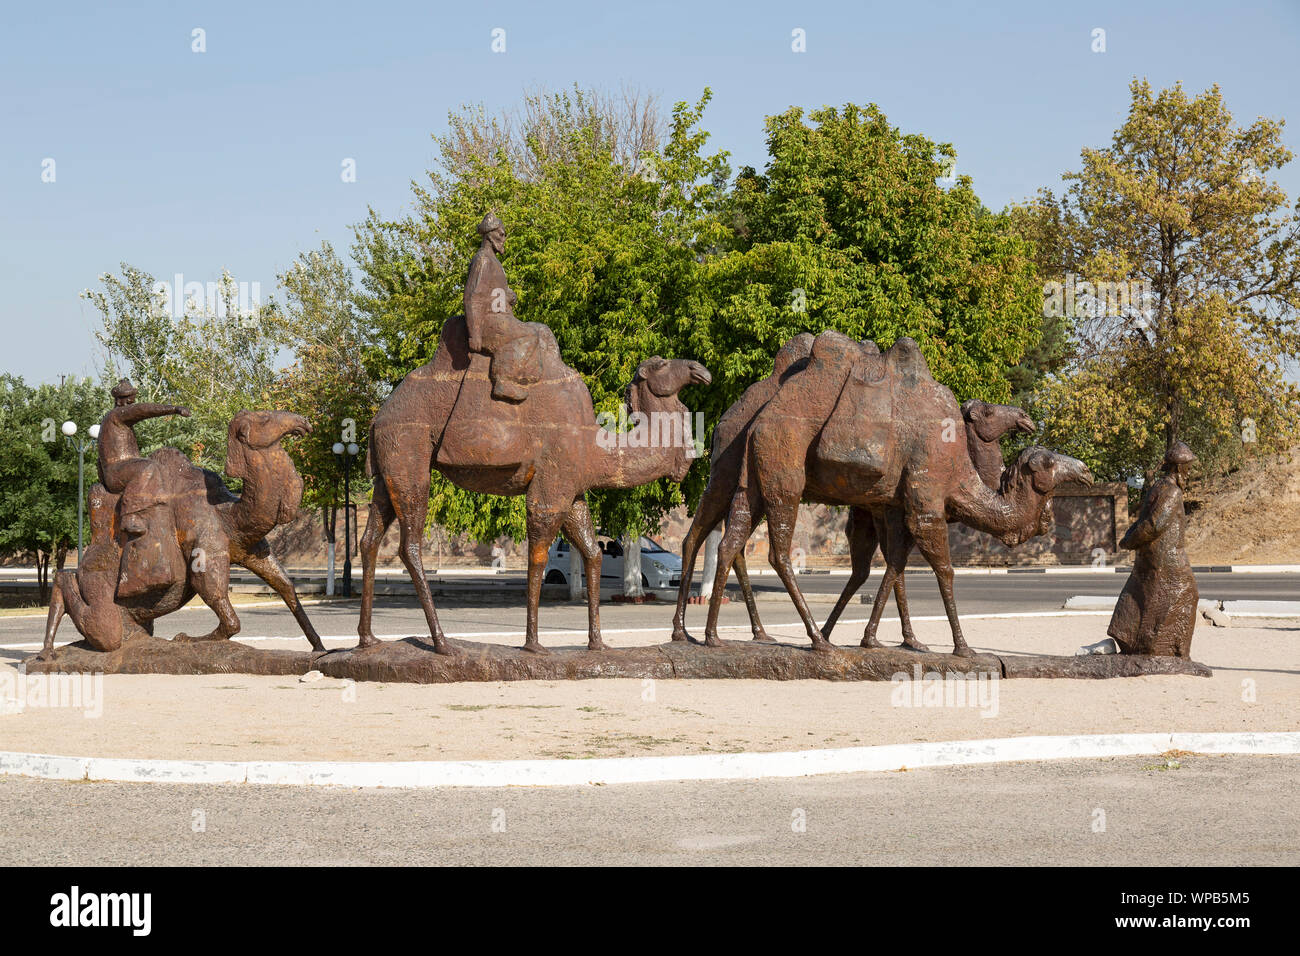 Statue of camels on the Silk Road, in the town of Samarkand in Uzbekistan. Stock Photo